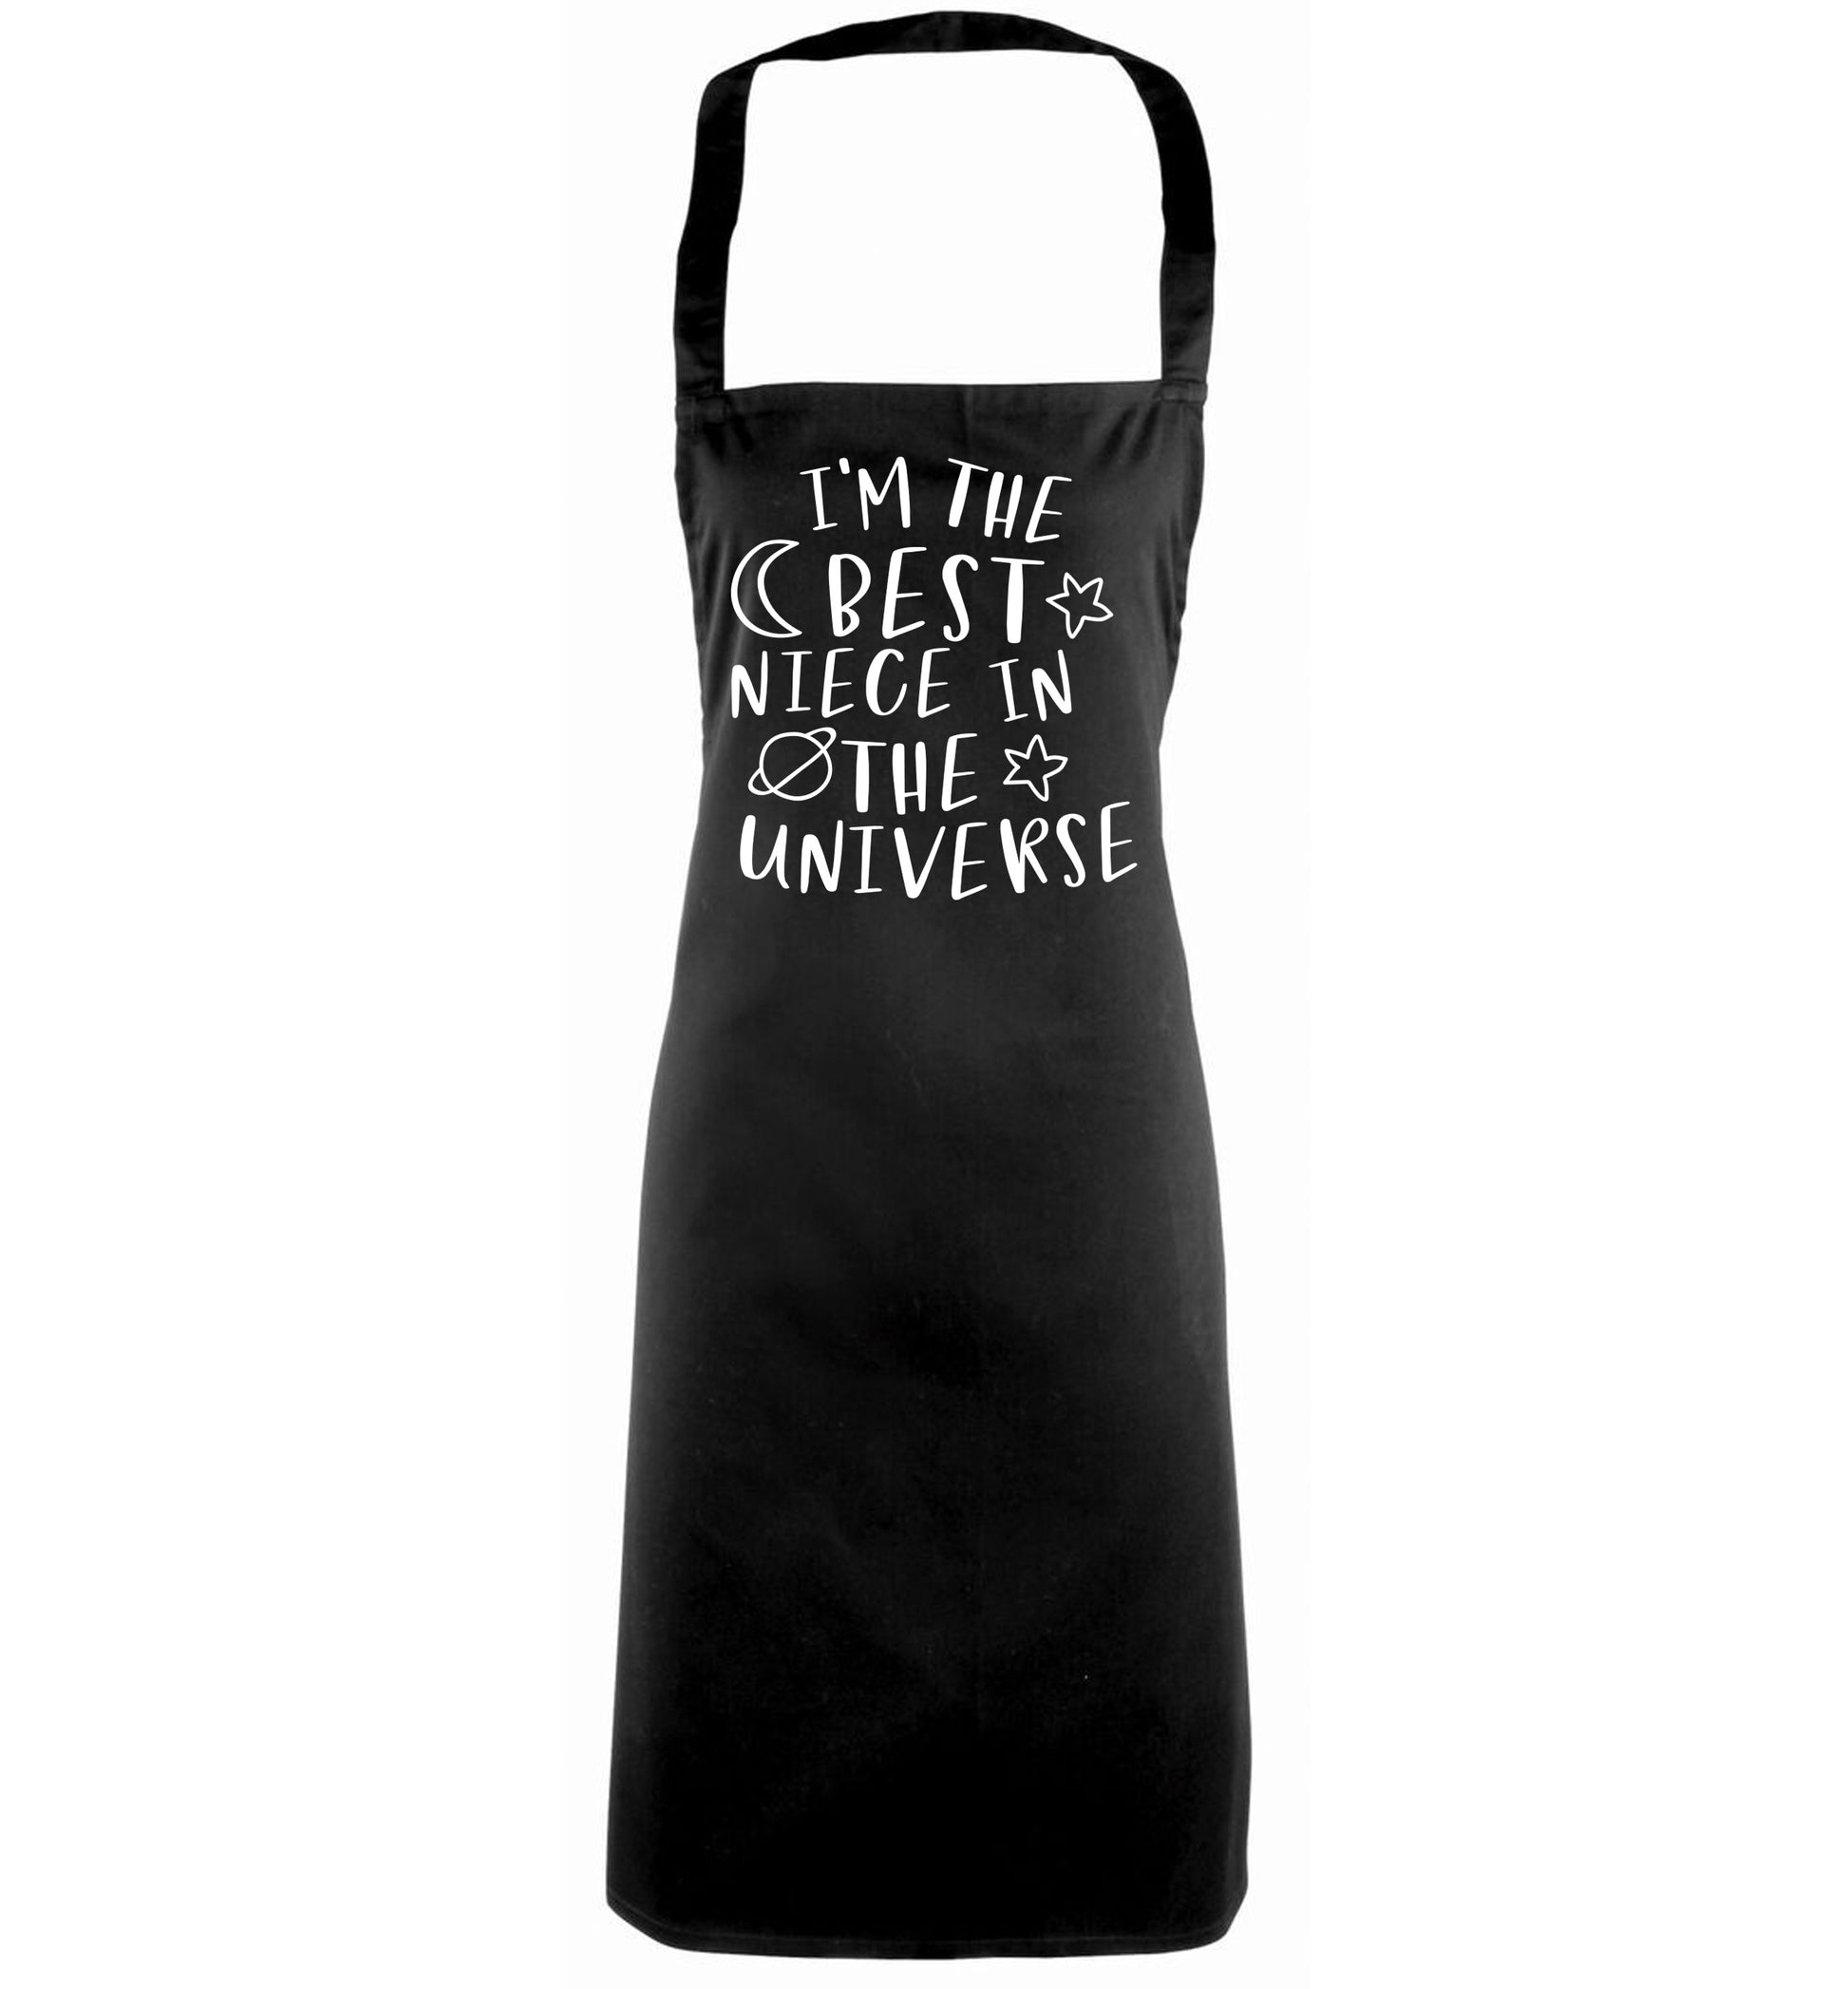 I'm the best niece in the universe black apron